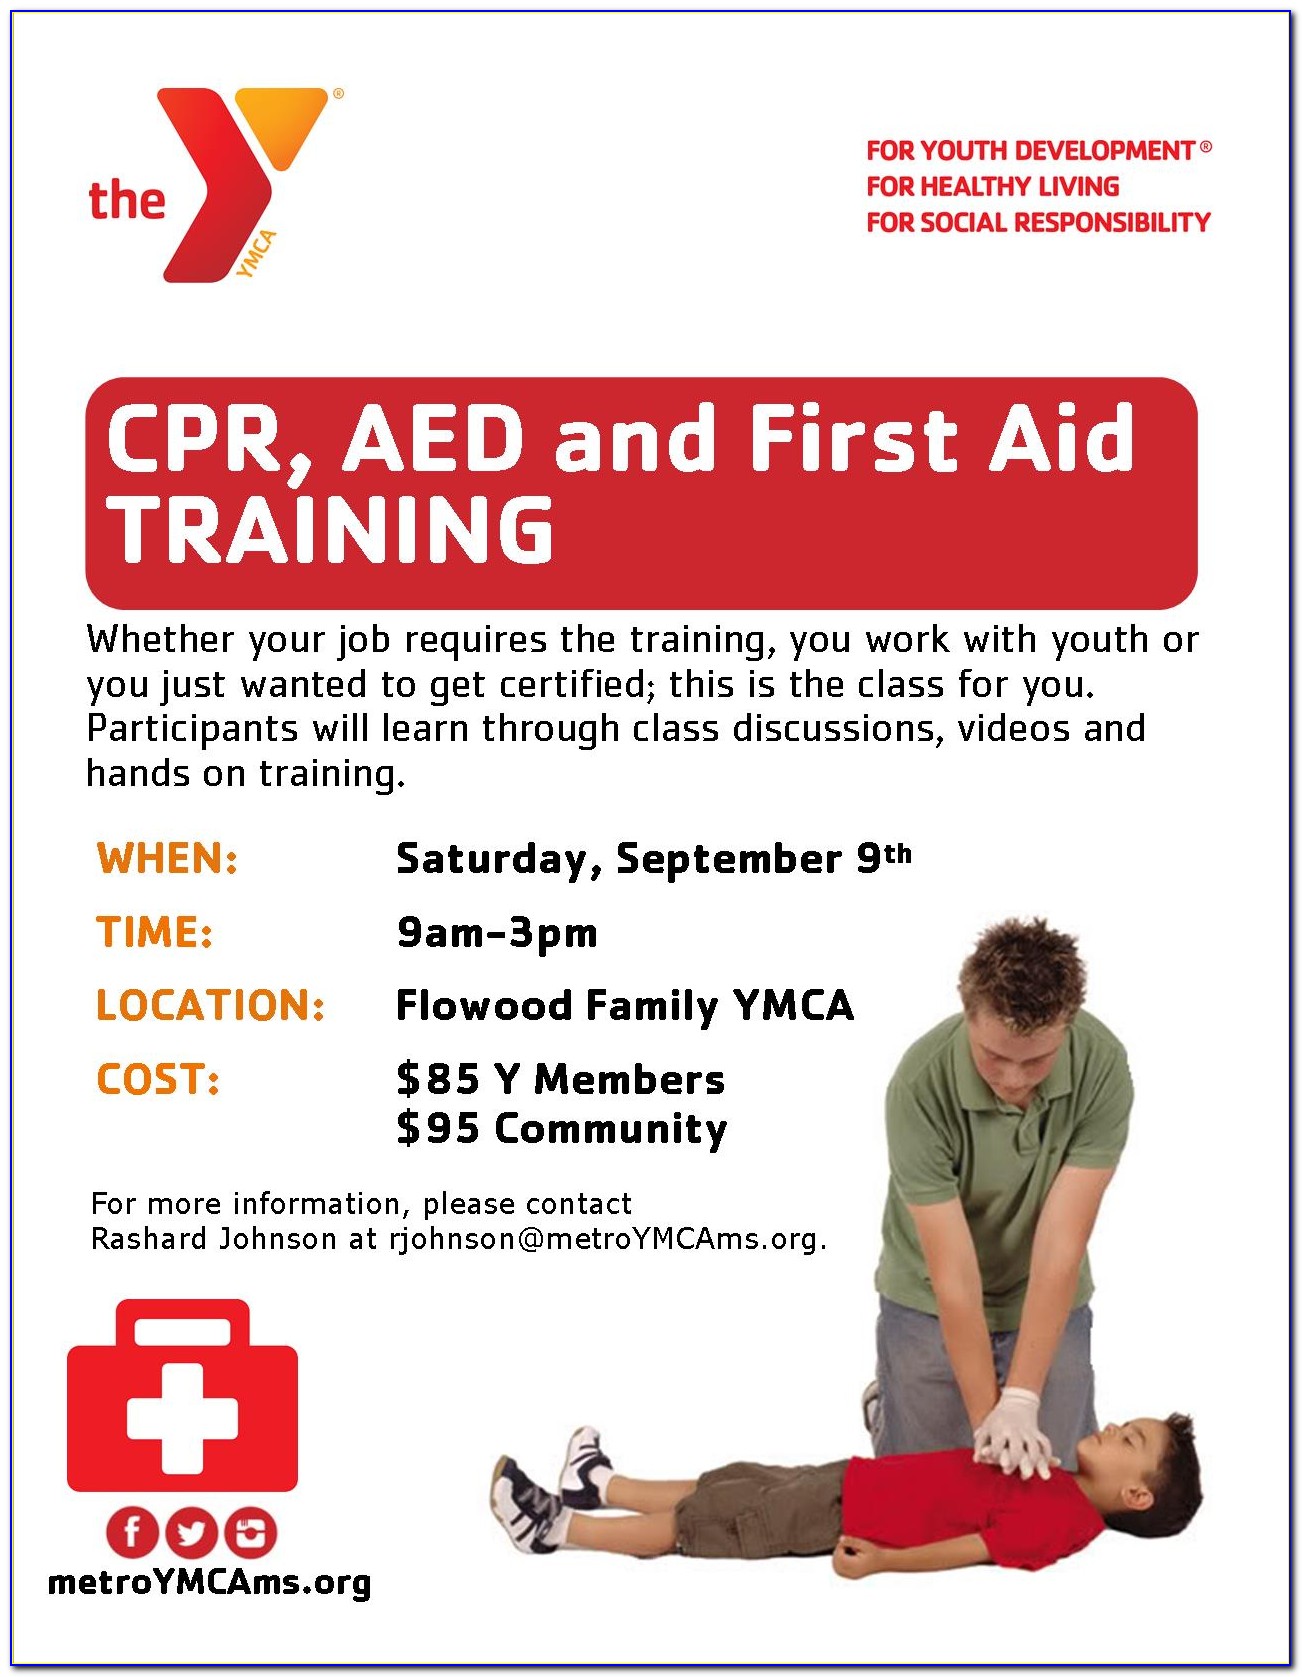 Enjoycpr (cpr & First Aid Certifications) Long Beach Ca